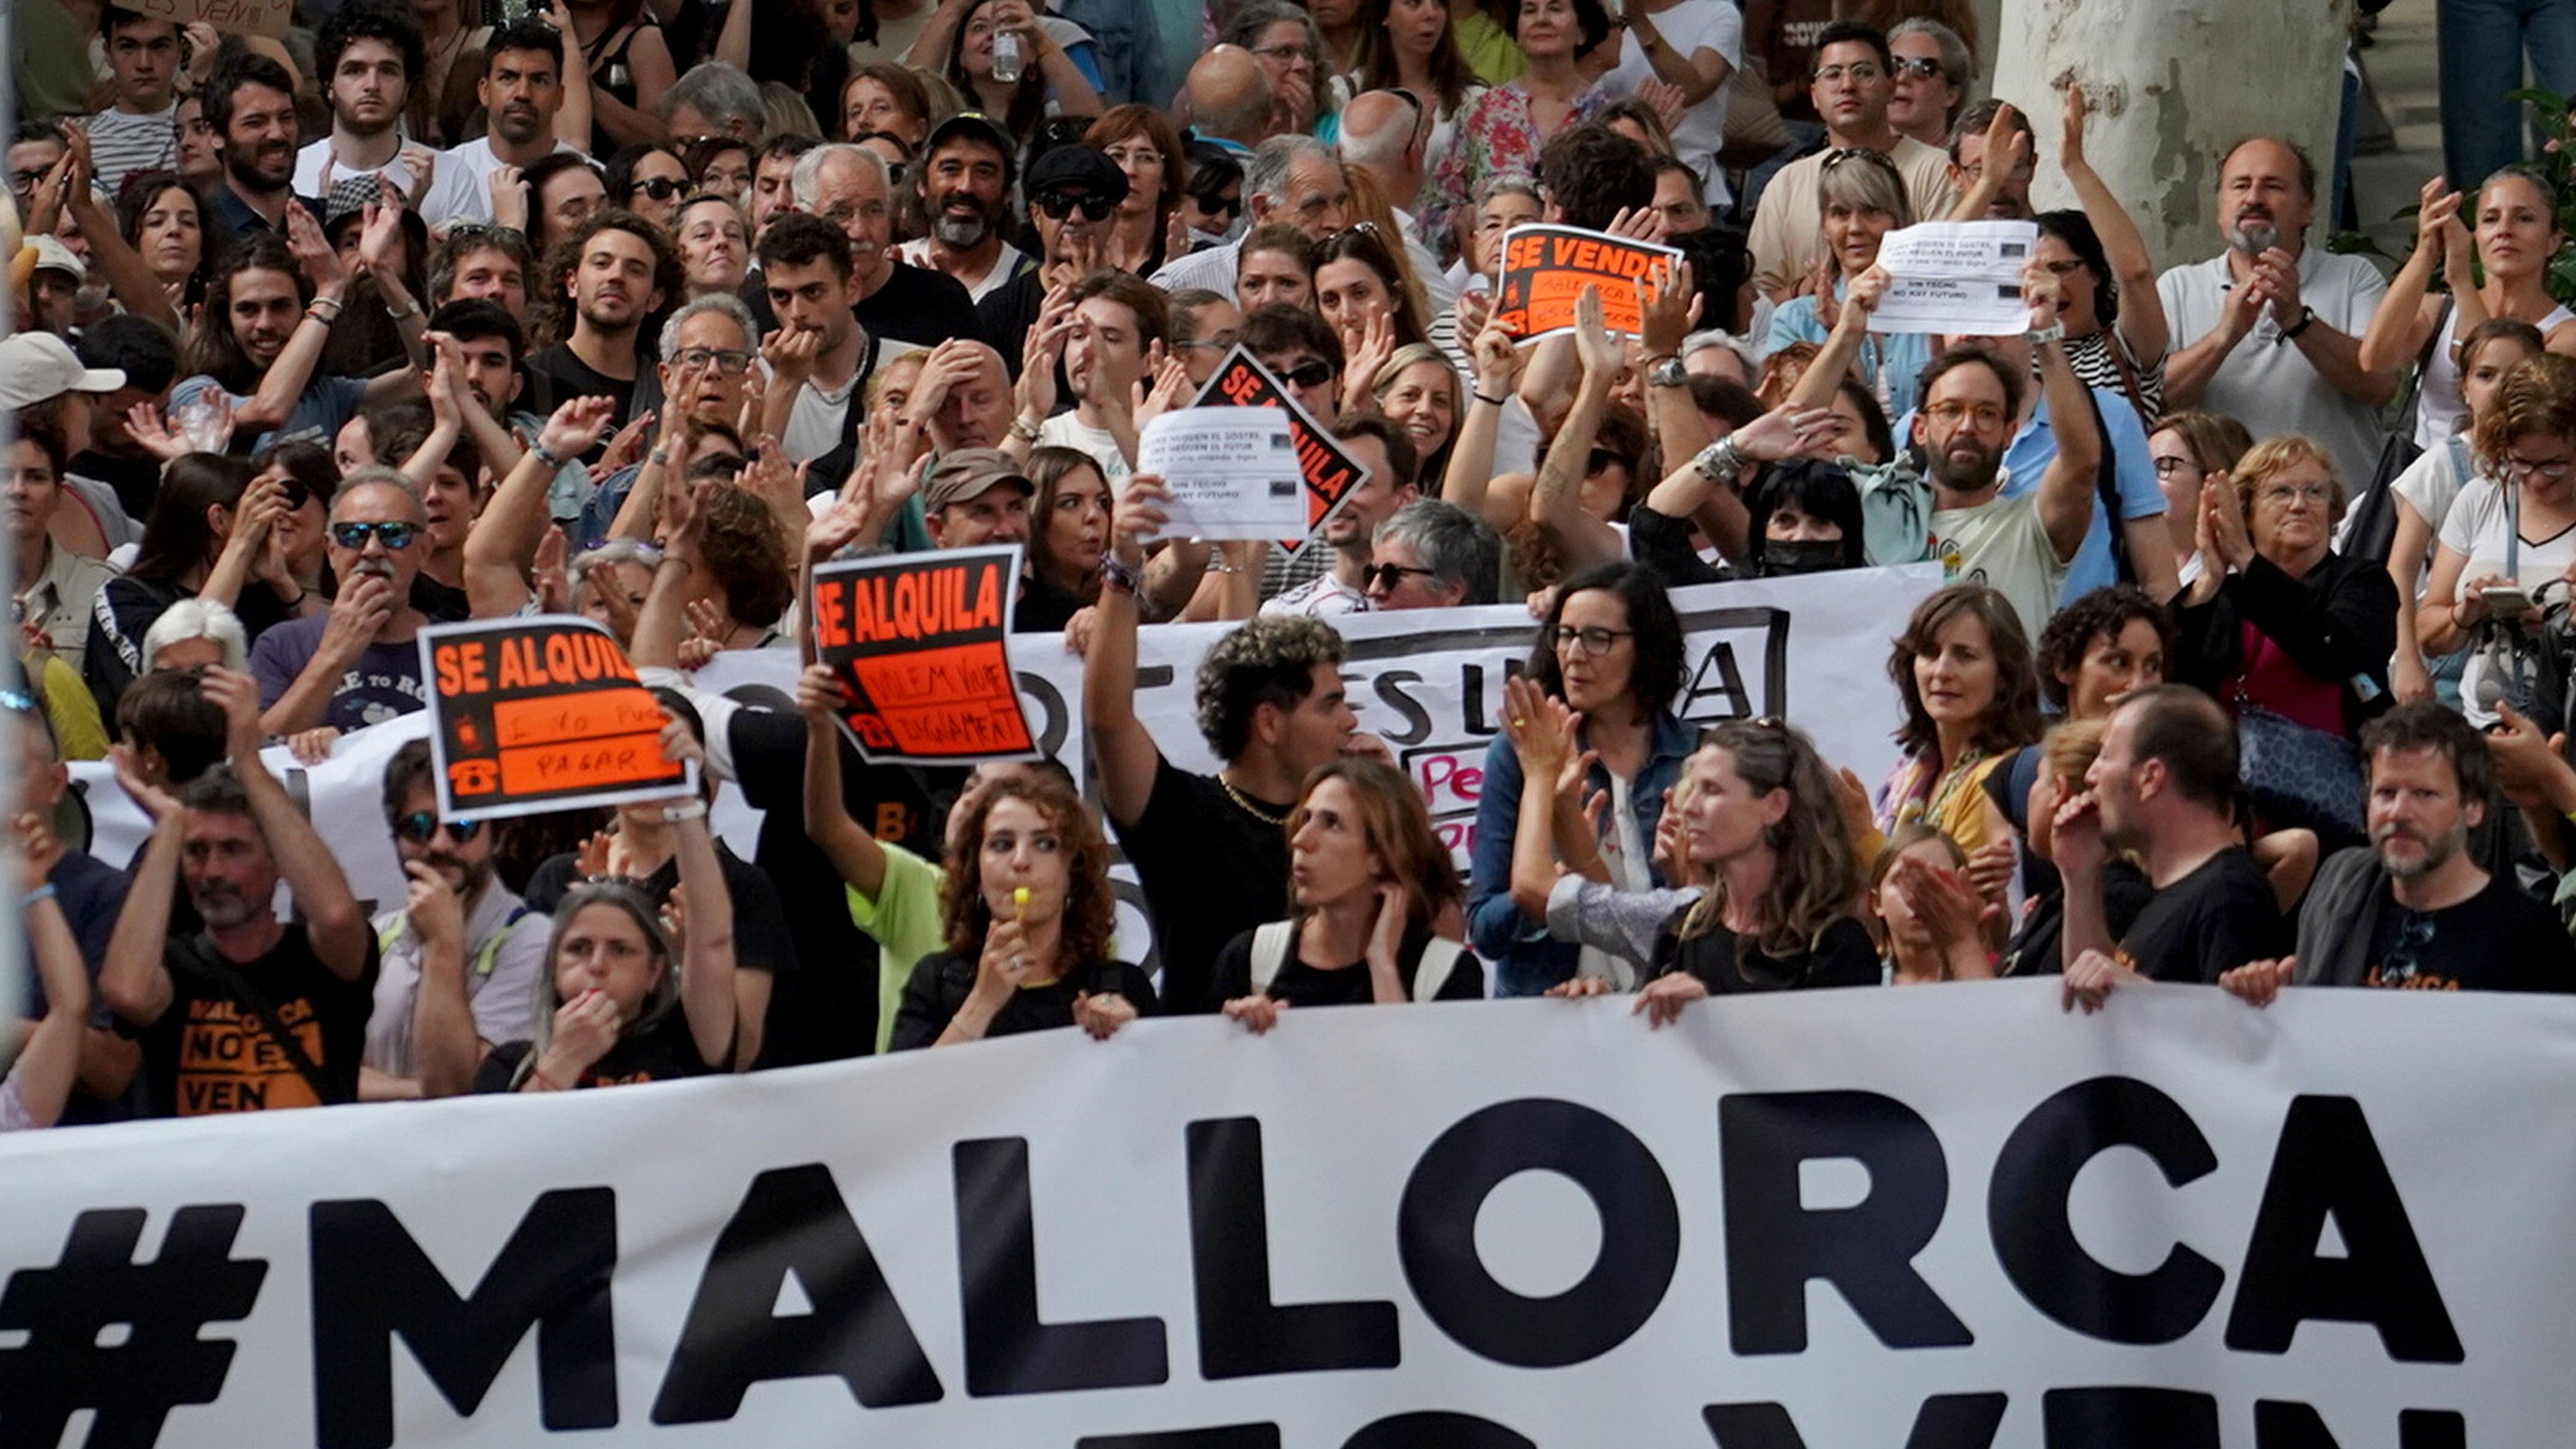 Demonstrations against the amount of tourism in Mallorca have been growing, with thousands protesting